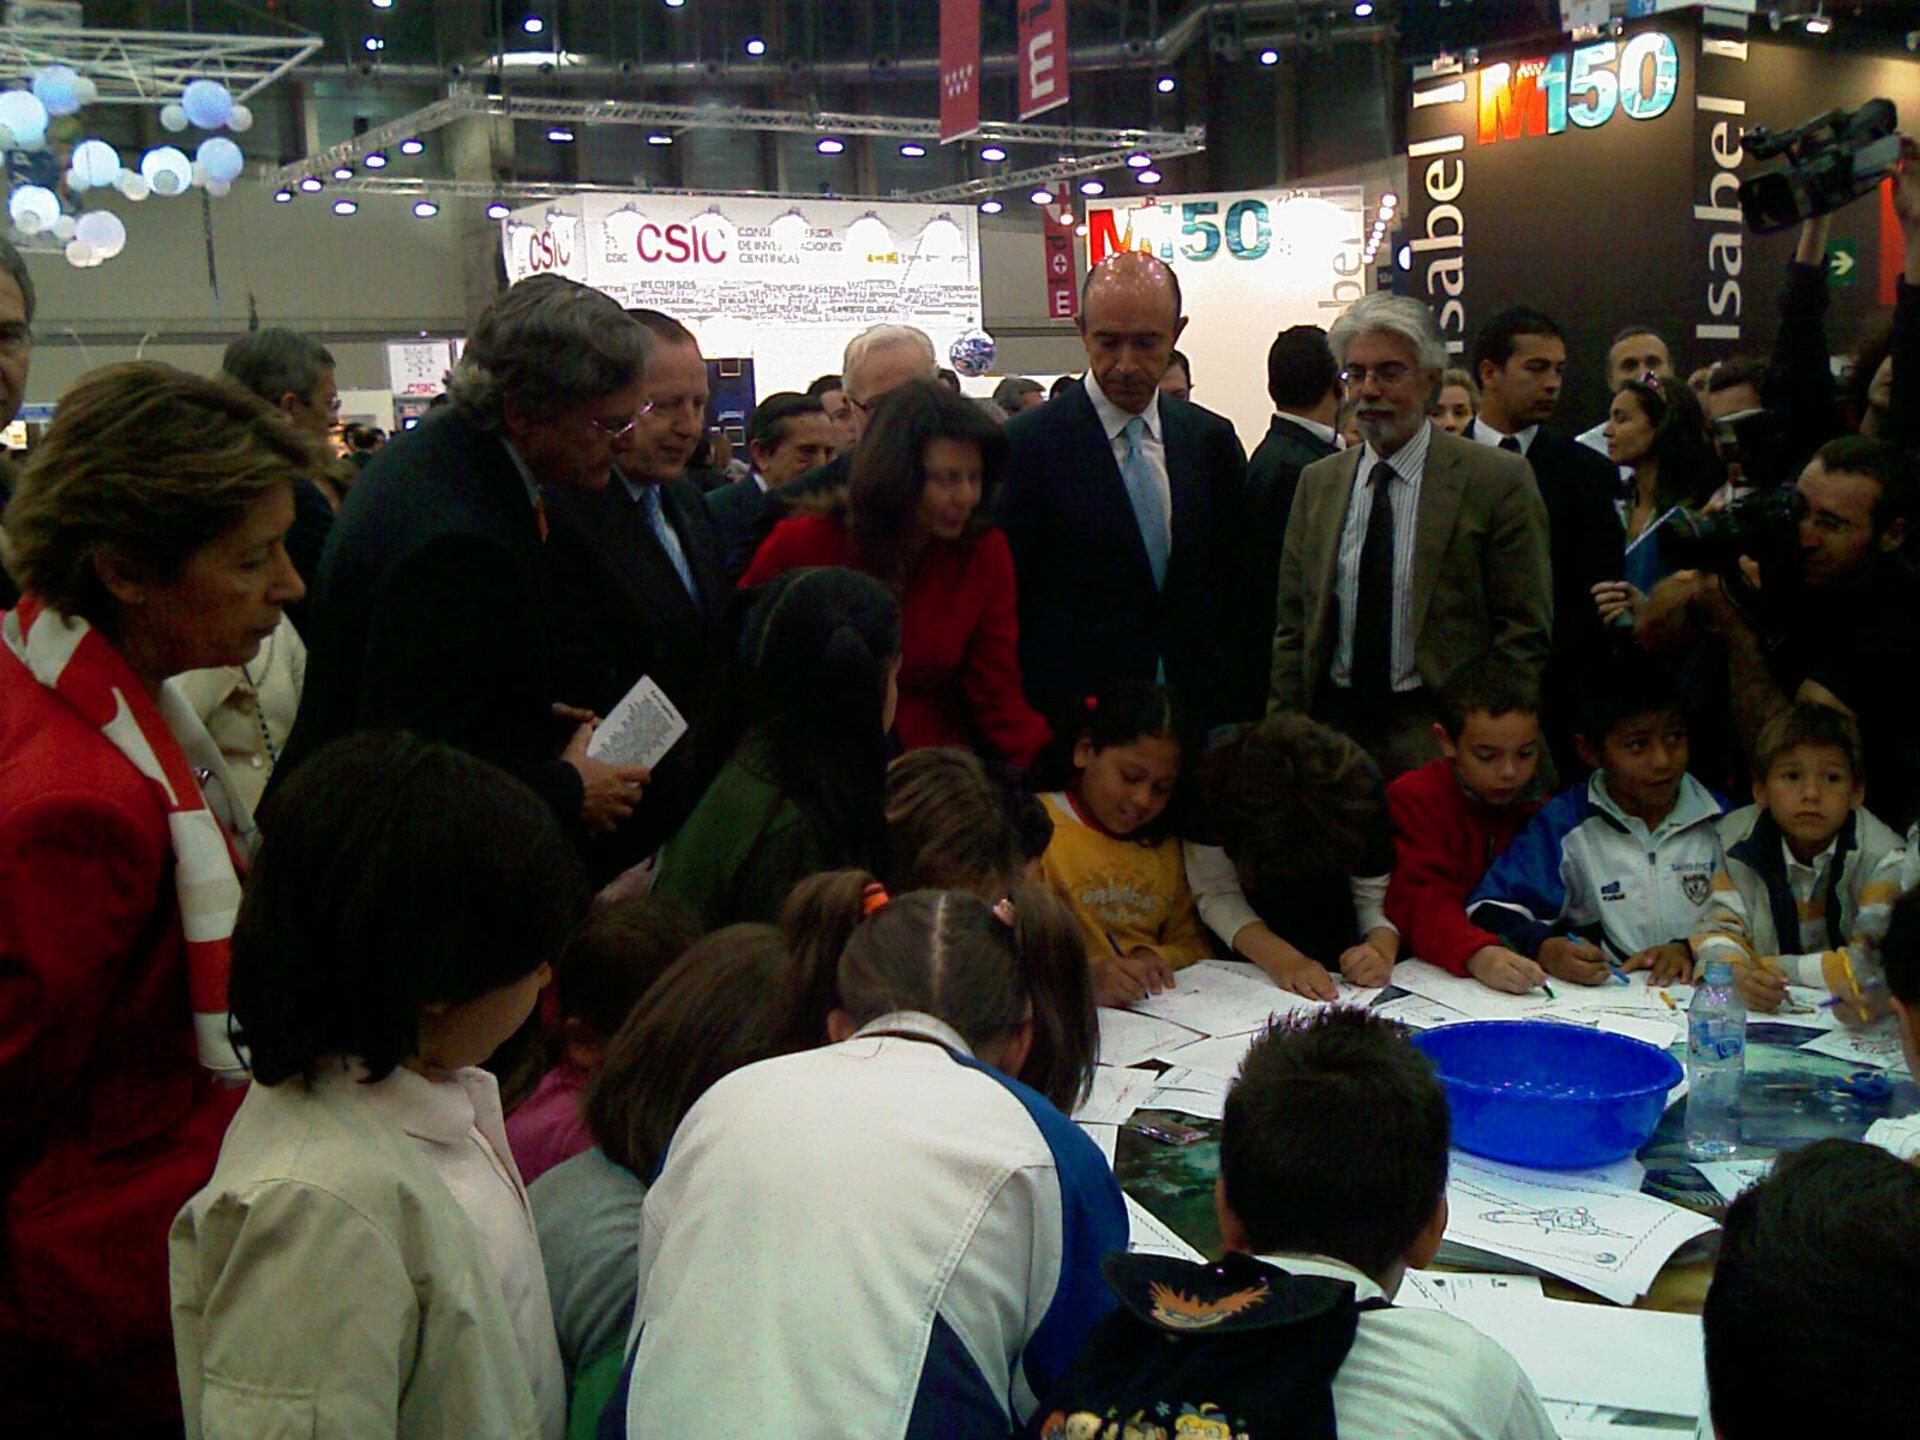 Group of Authorities visited our stand